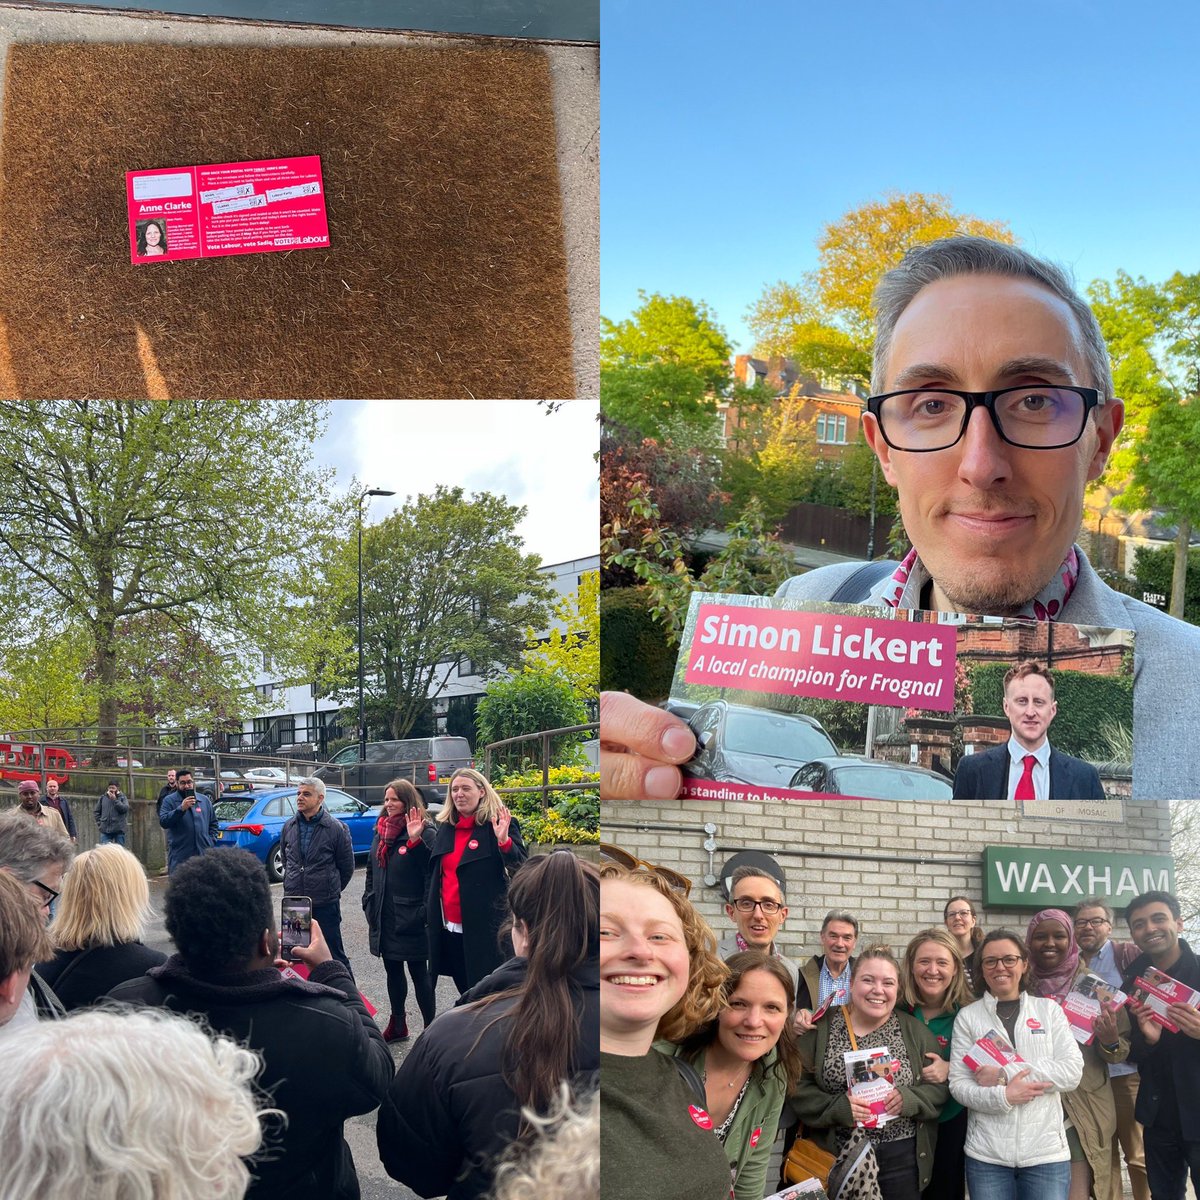 It’s May 2nd so it’s time to vote @UKLabour to send a clear message to this tired, out of touch, hapless government - it’s time for change! #MayoralElection2024 #LocalElections #labour